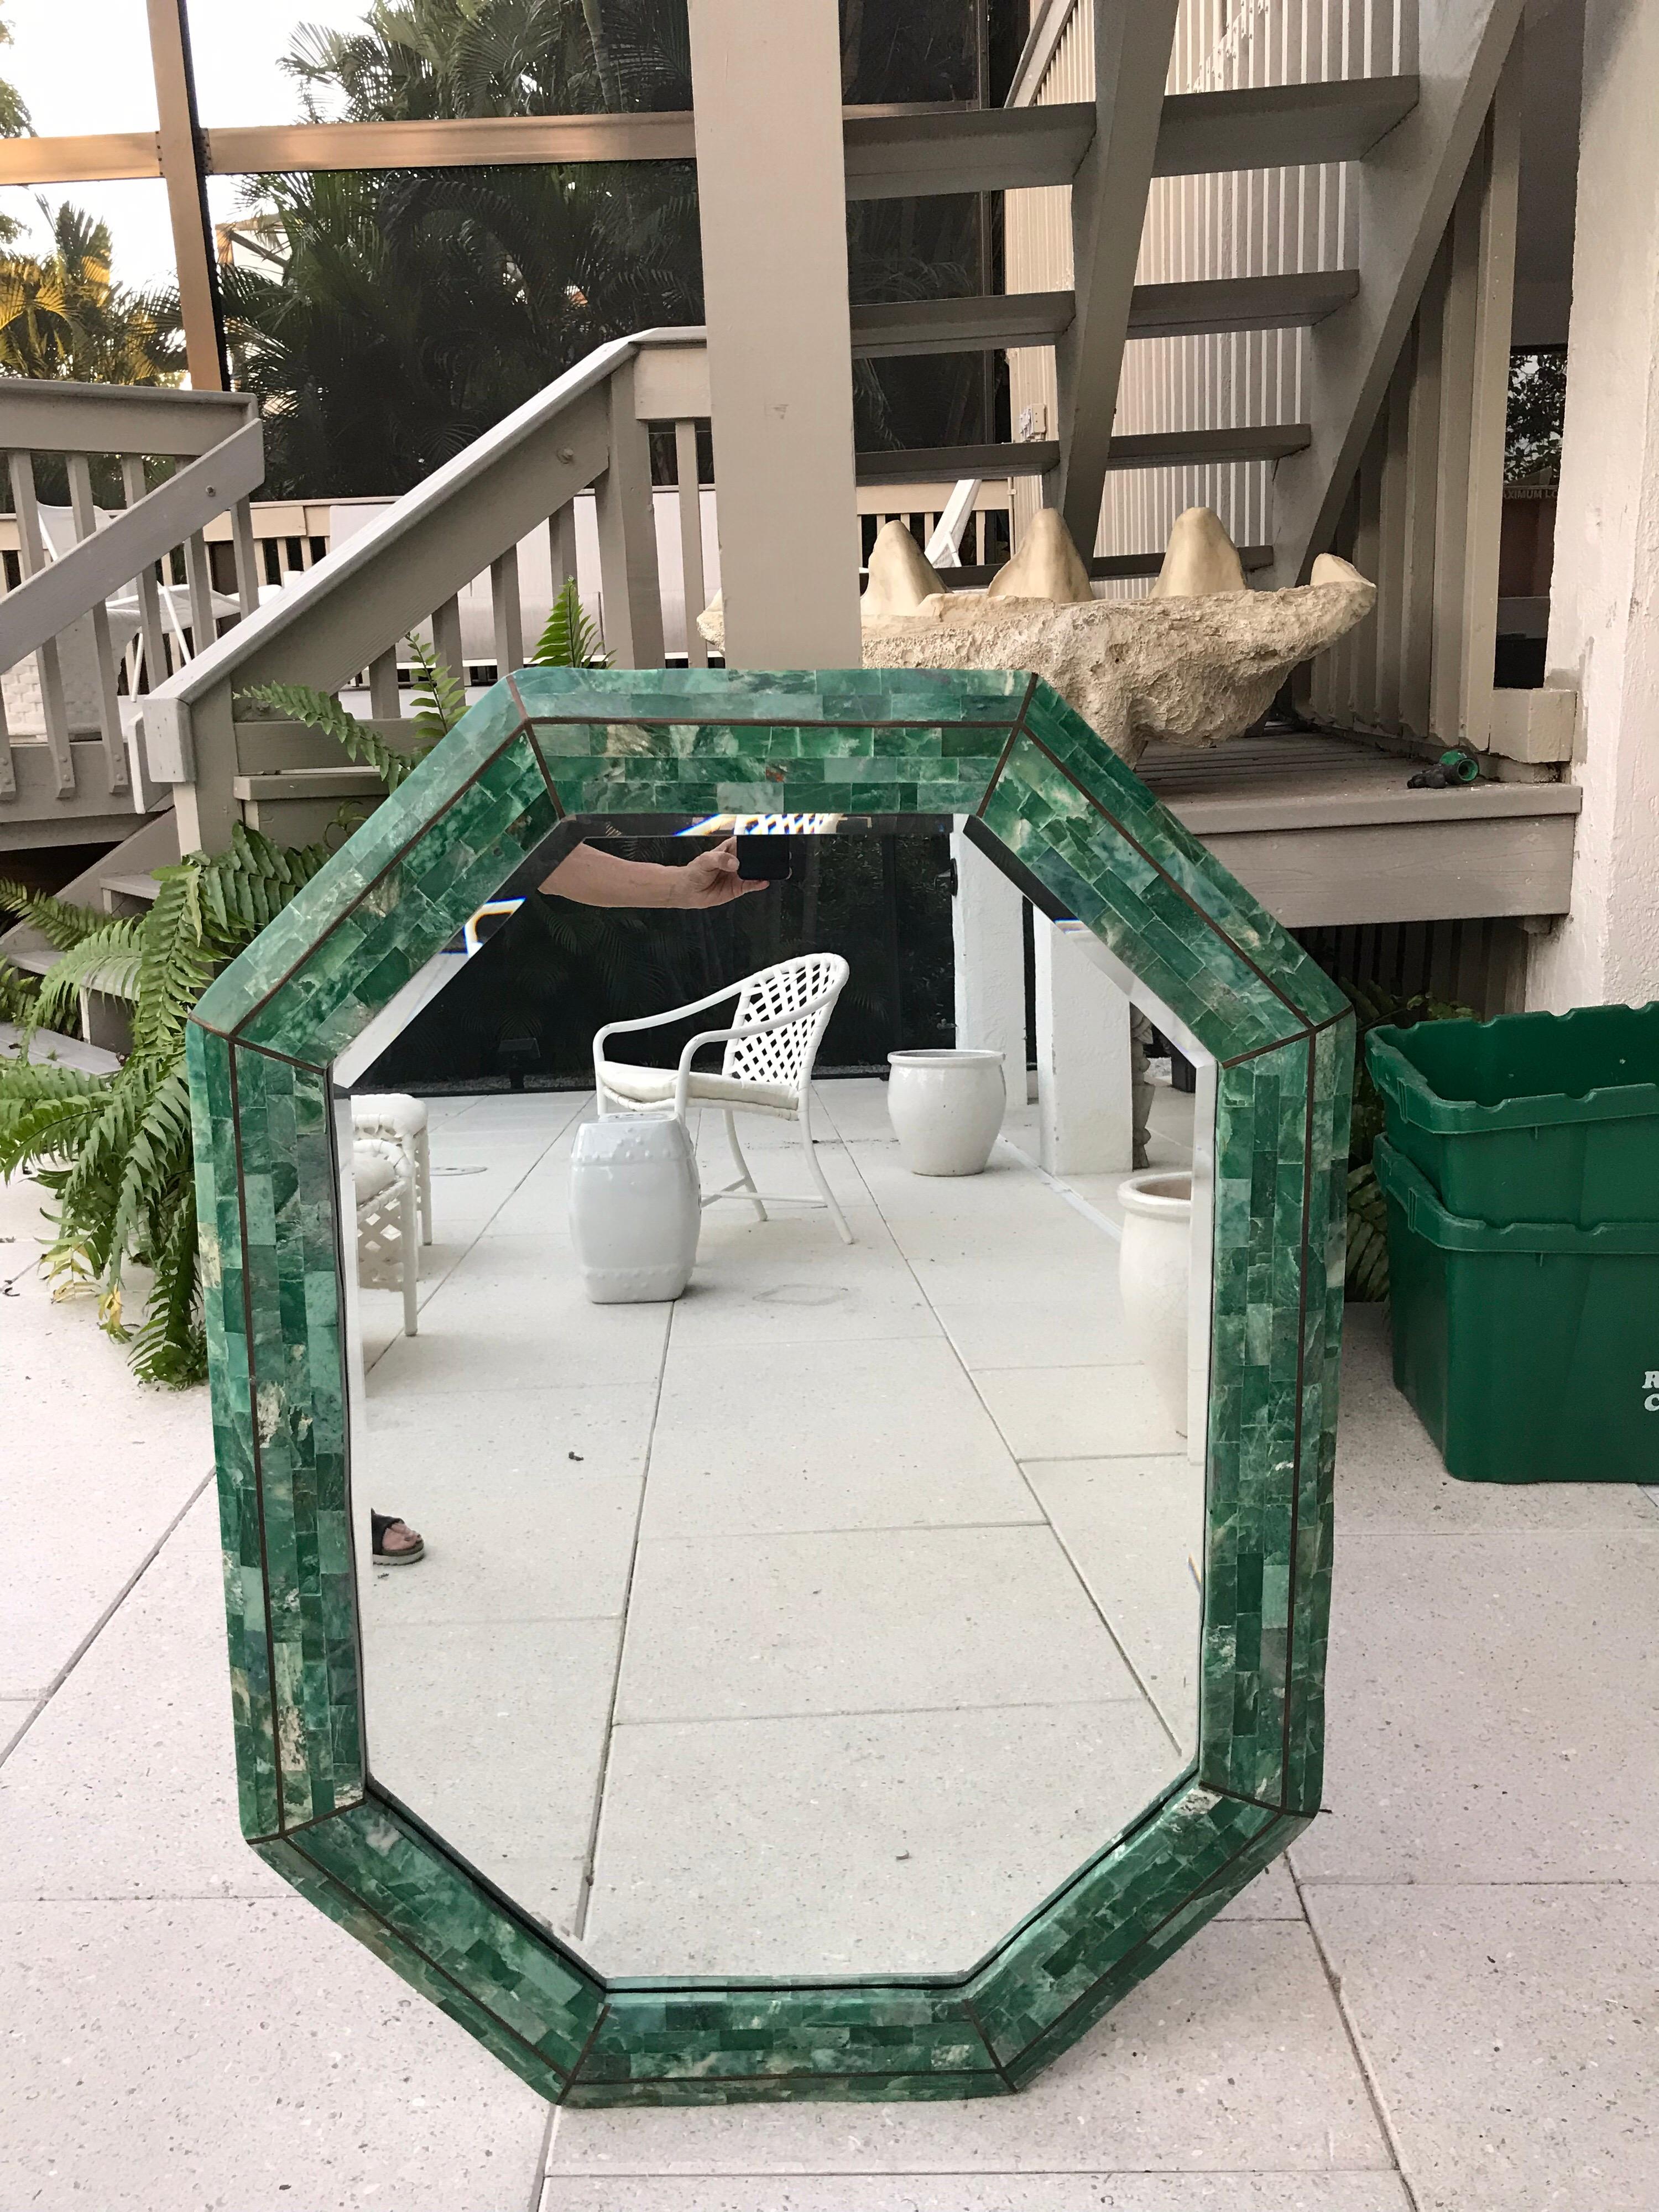 This is a octagonal tessellated malachite colored stone mirror with brass inlays The mirror was designed by Robert Marcius for Maitland-Smith in 1984-1986.